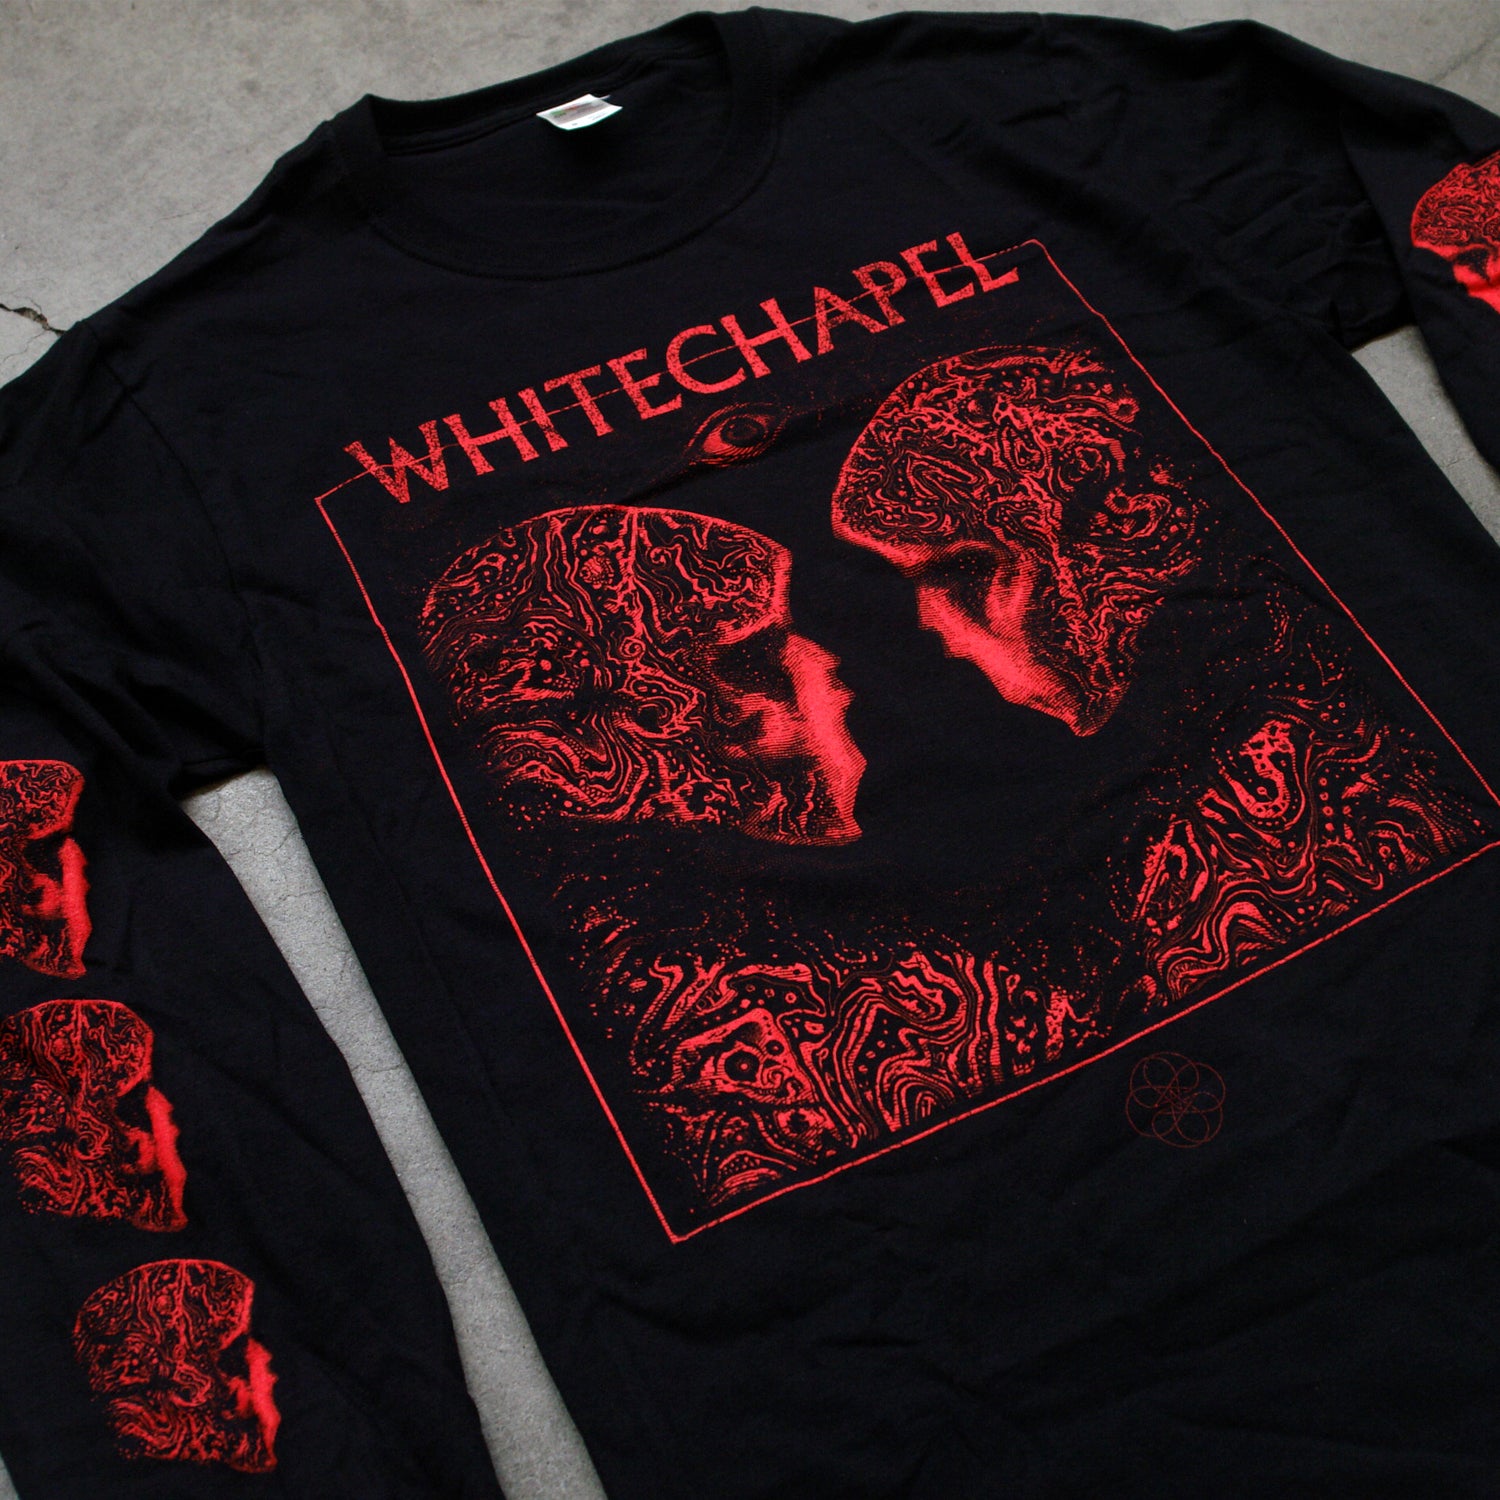 close up Image of the front of a black longsleeve on a grey concrete background. The front shows two skulls/skeletal figures from the shoulders up looking at one another- made up of red and black oil. This is outlined in a thin red square. Above the square in red text with the top line of the square going through the letters reads "whitechapel". Below the word "whitechapel" is a red image of an opened eyeball. Both sleeves have 3 of the skeletal figure heads on them, facing inwards.